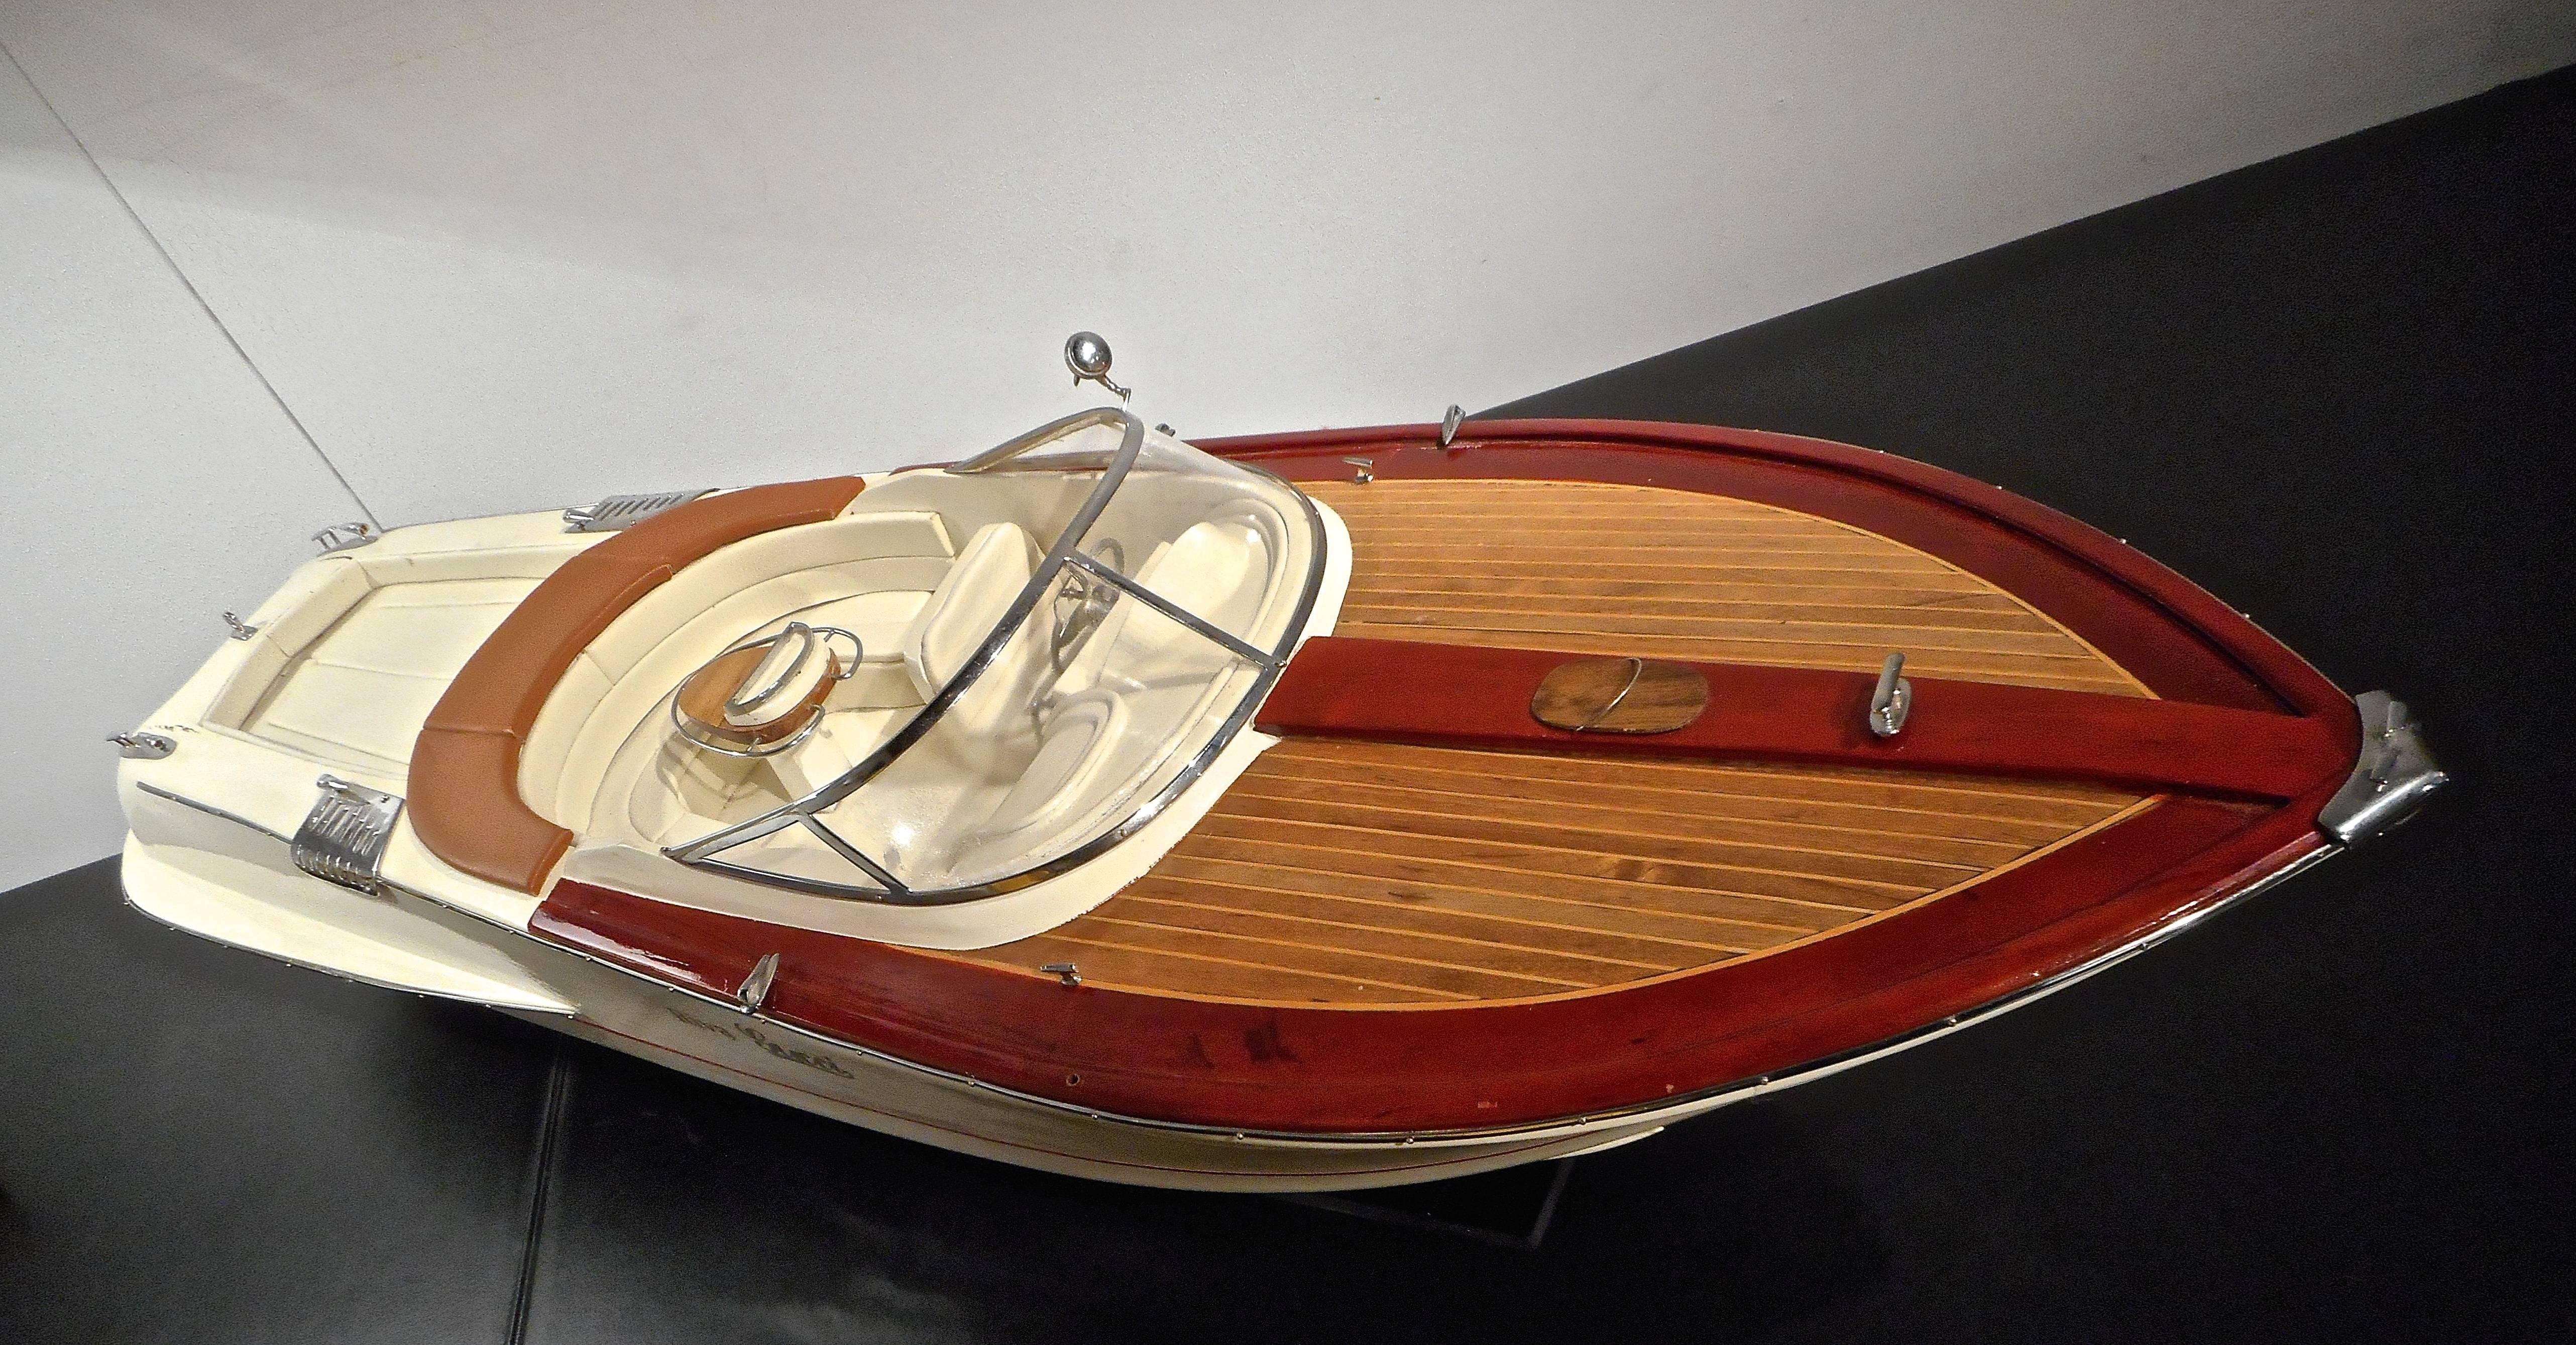 Brass Model of a Riva Designed by Gucci